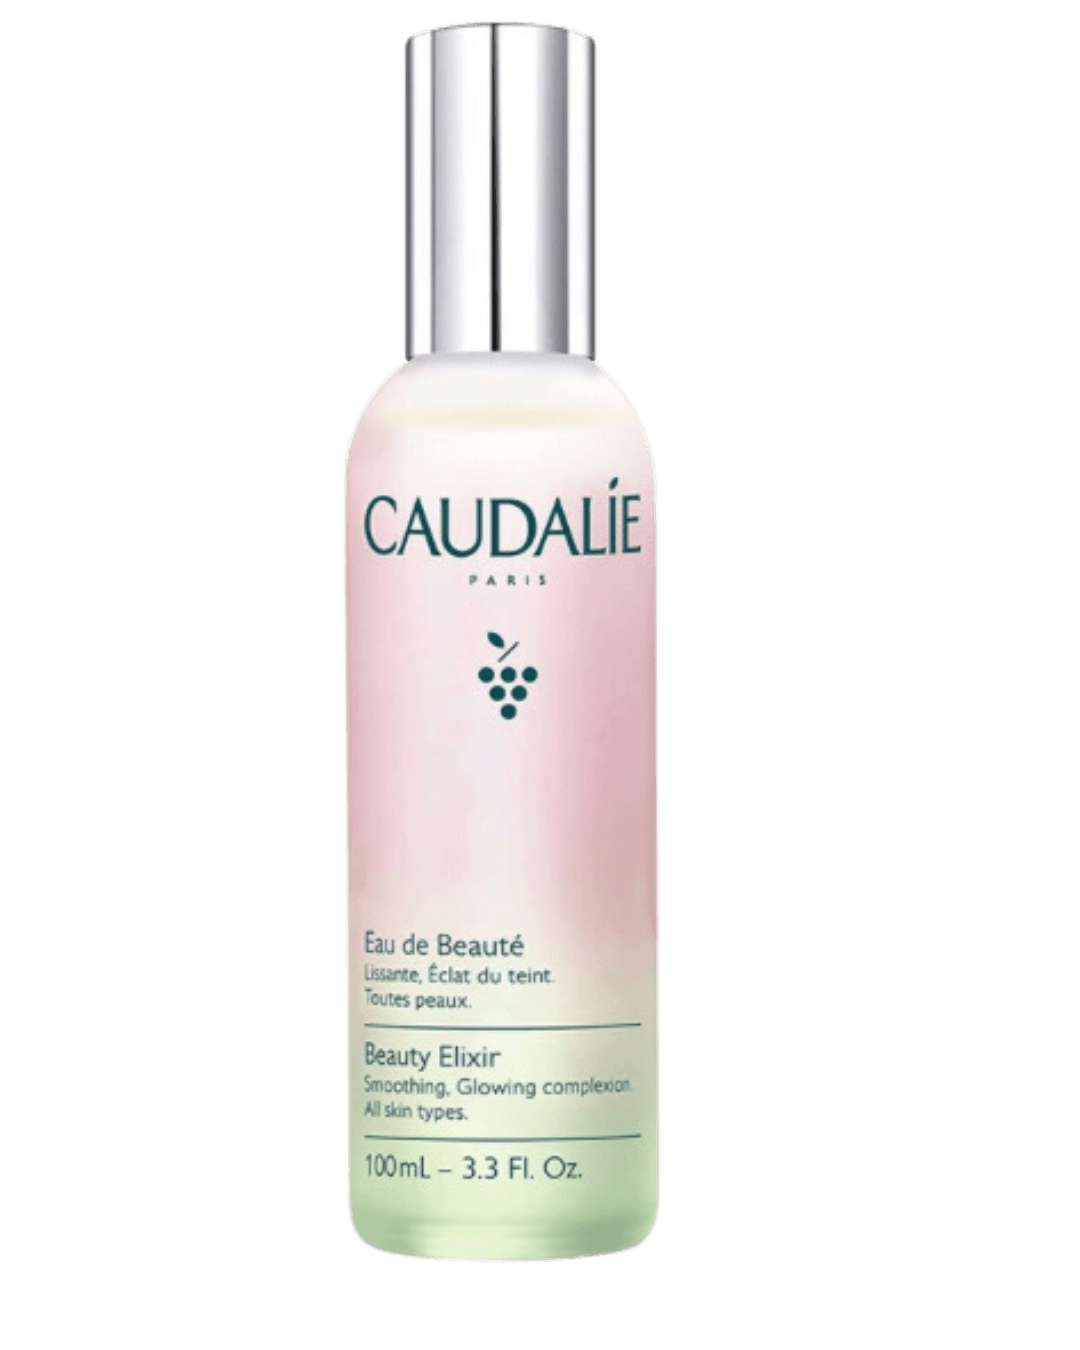 Daily Vanity Beauty Awards 2024 Best Skincare Caudalie Beauty Elixr Voted By Beauty Experts